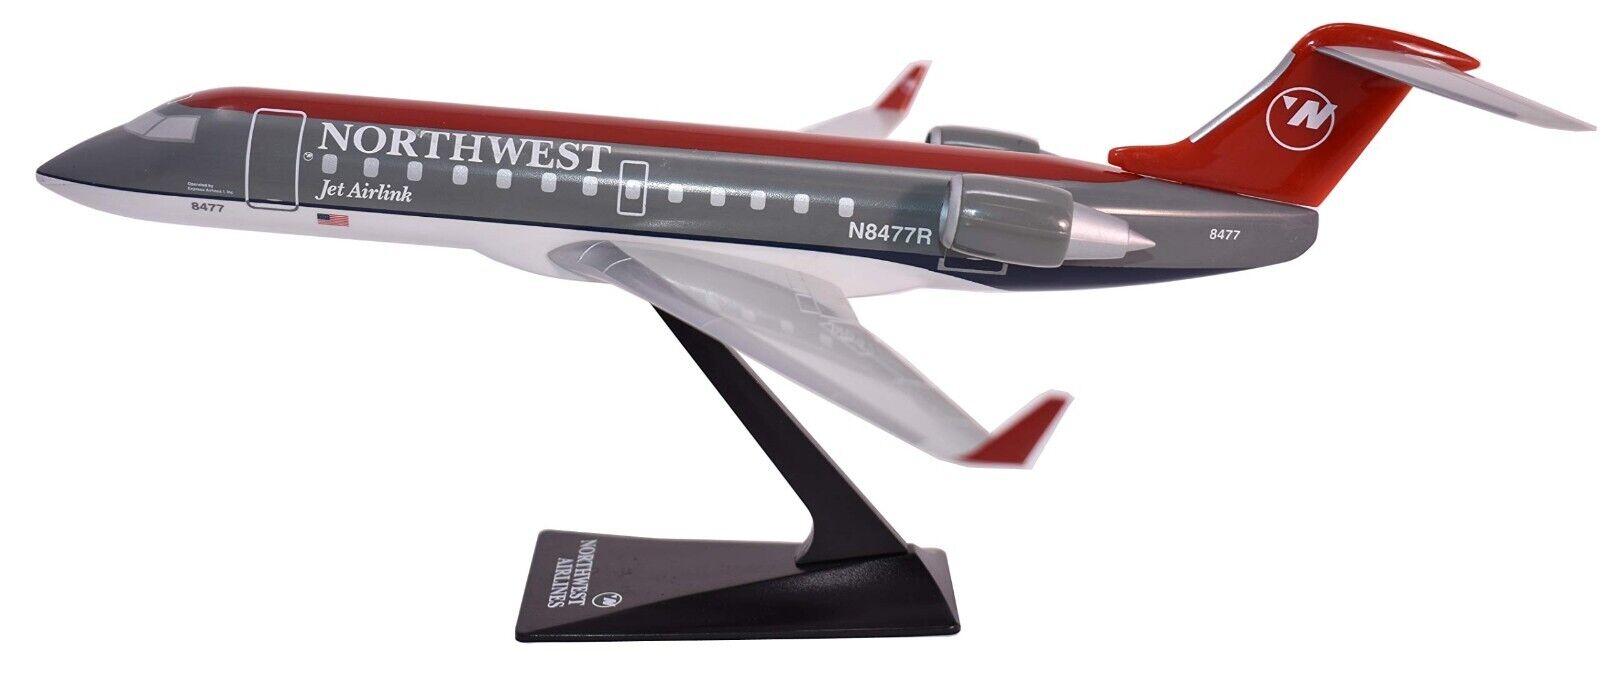 Northwest Airlines CRJ-200 1:100 - Brand New In Box